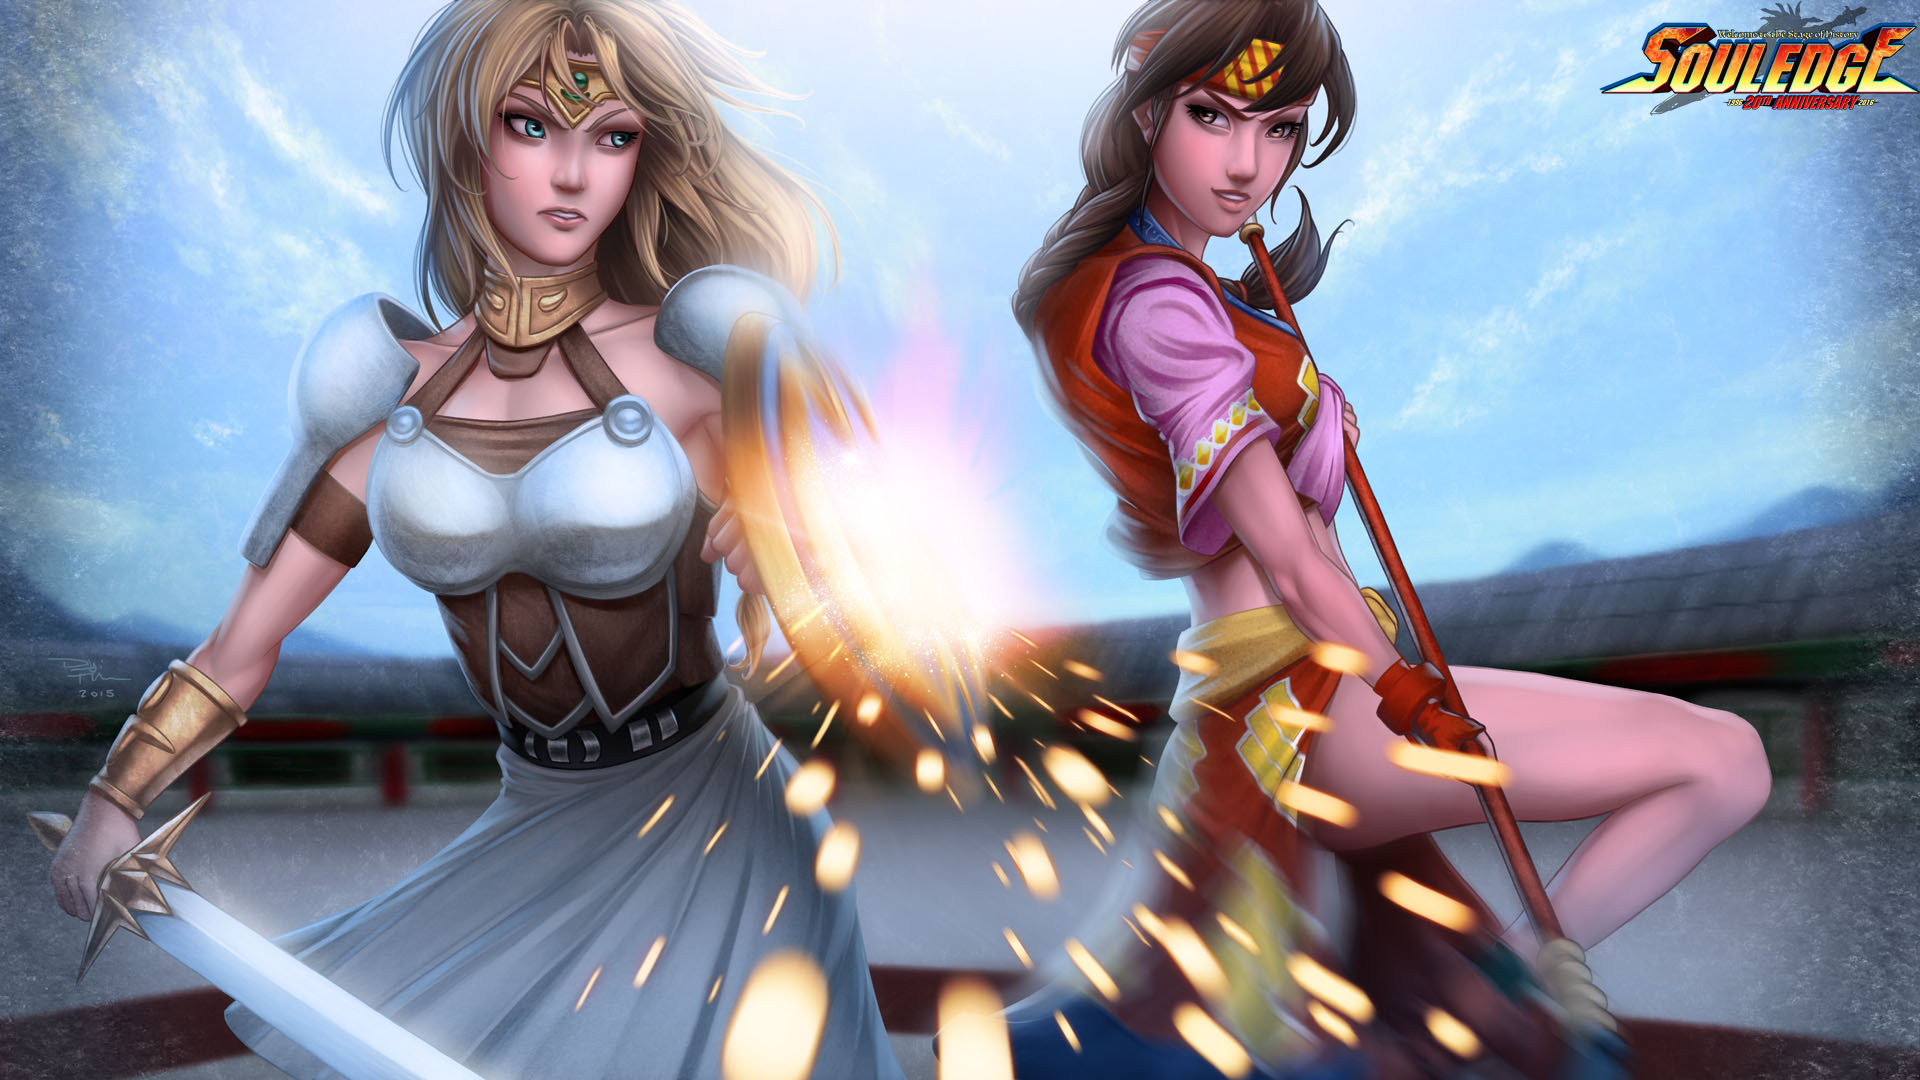 Sophitia and Seung Mina from SoulEdge drawn for the SoulEdge Tribute on Game-Art-HQ by DigiFlohw